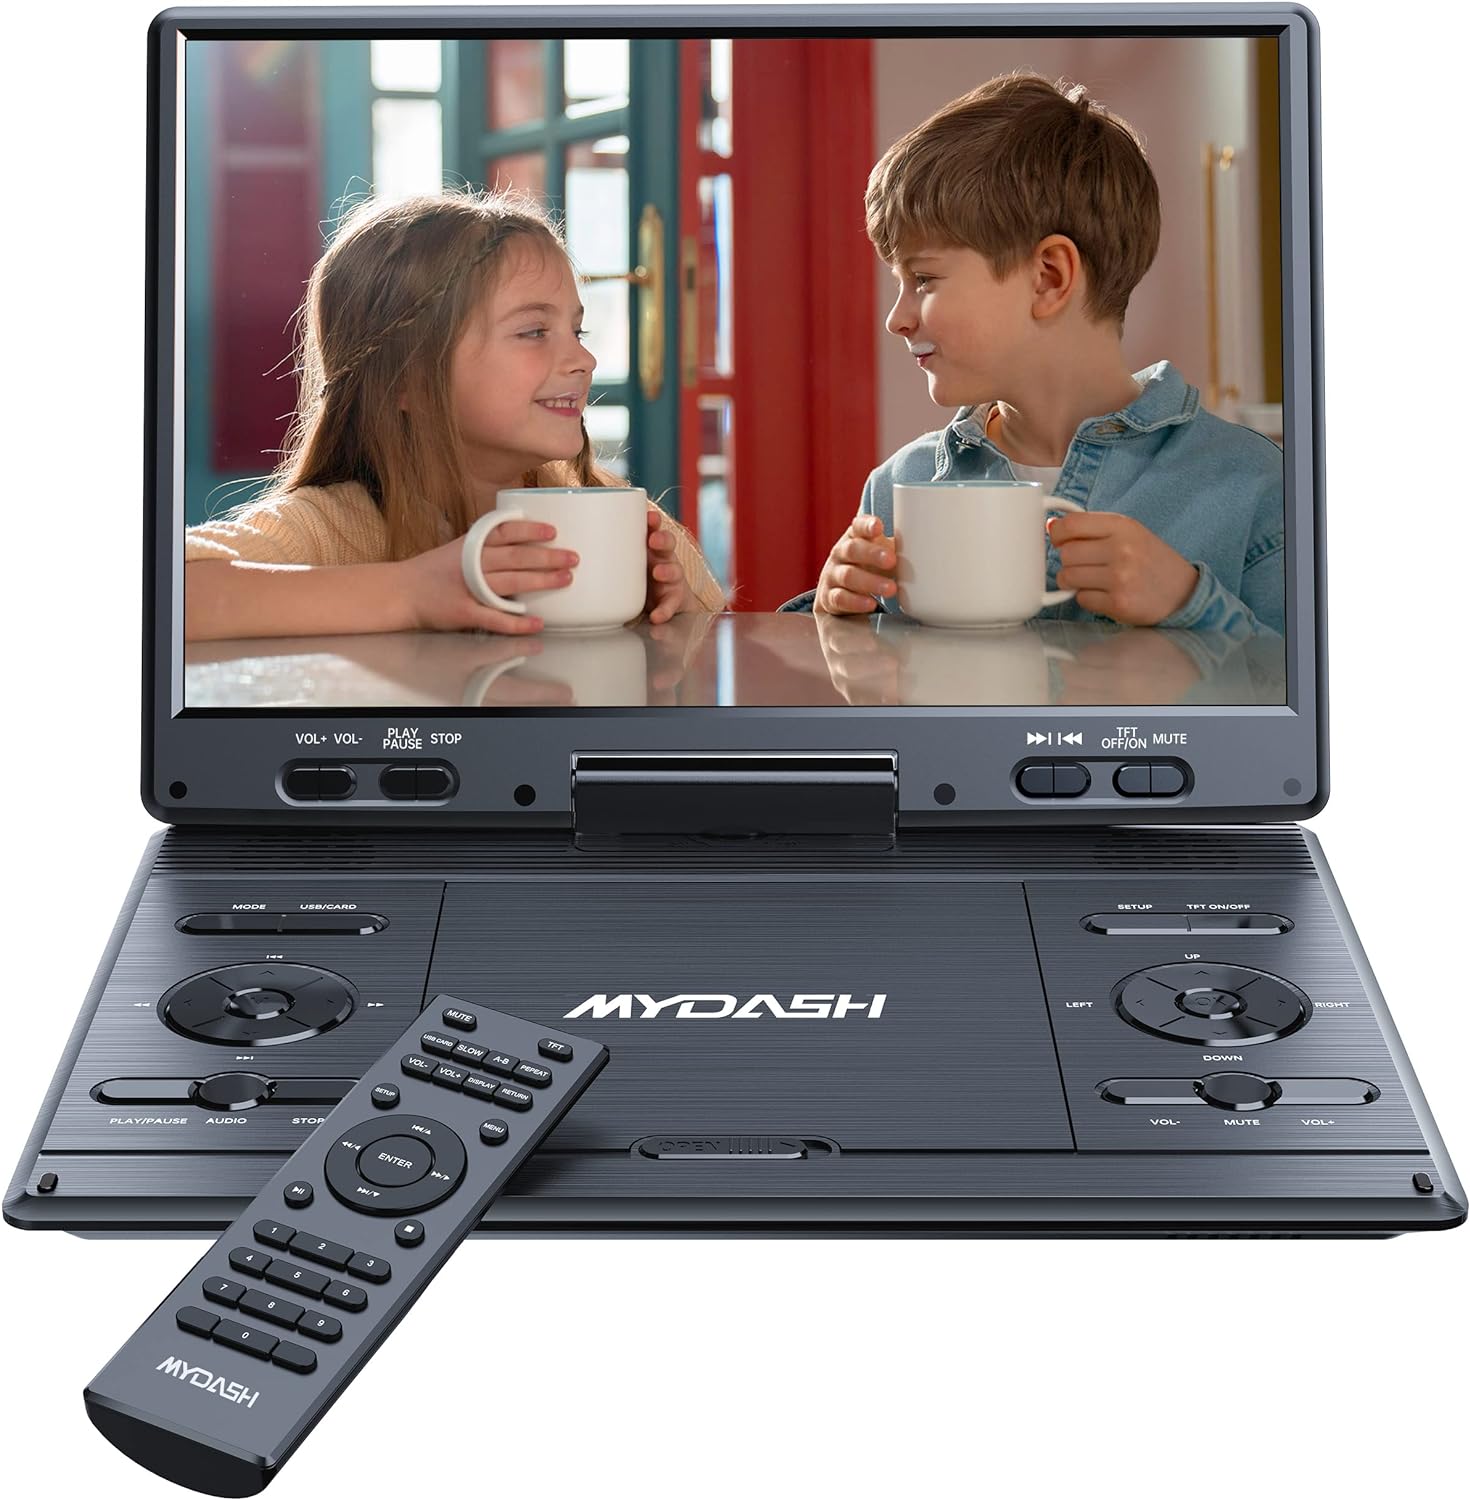 MYDASH 14.9" Portable DVD Player with 12.5" Large HD Swivel Screen - $55